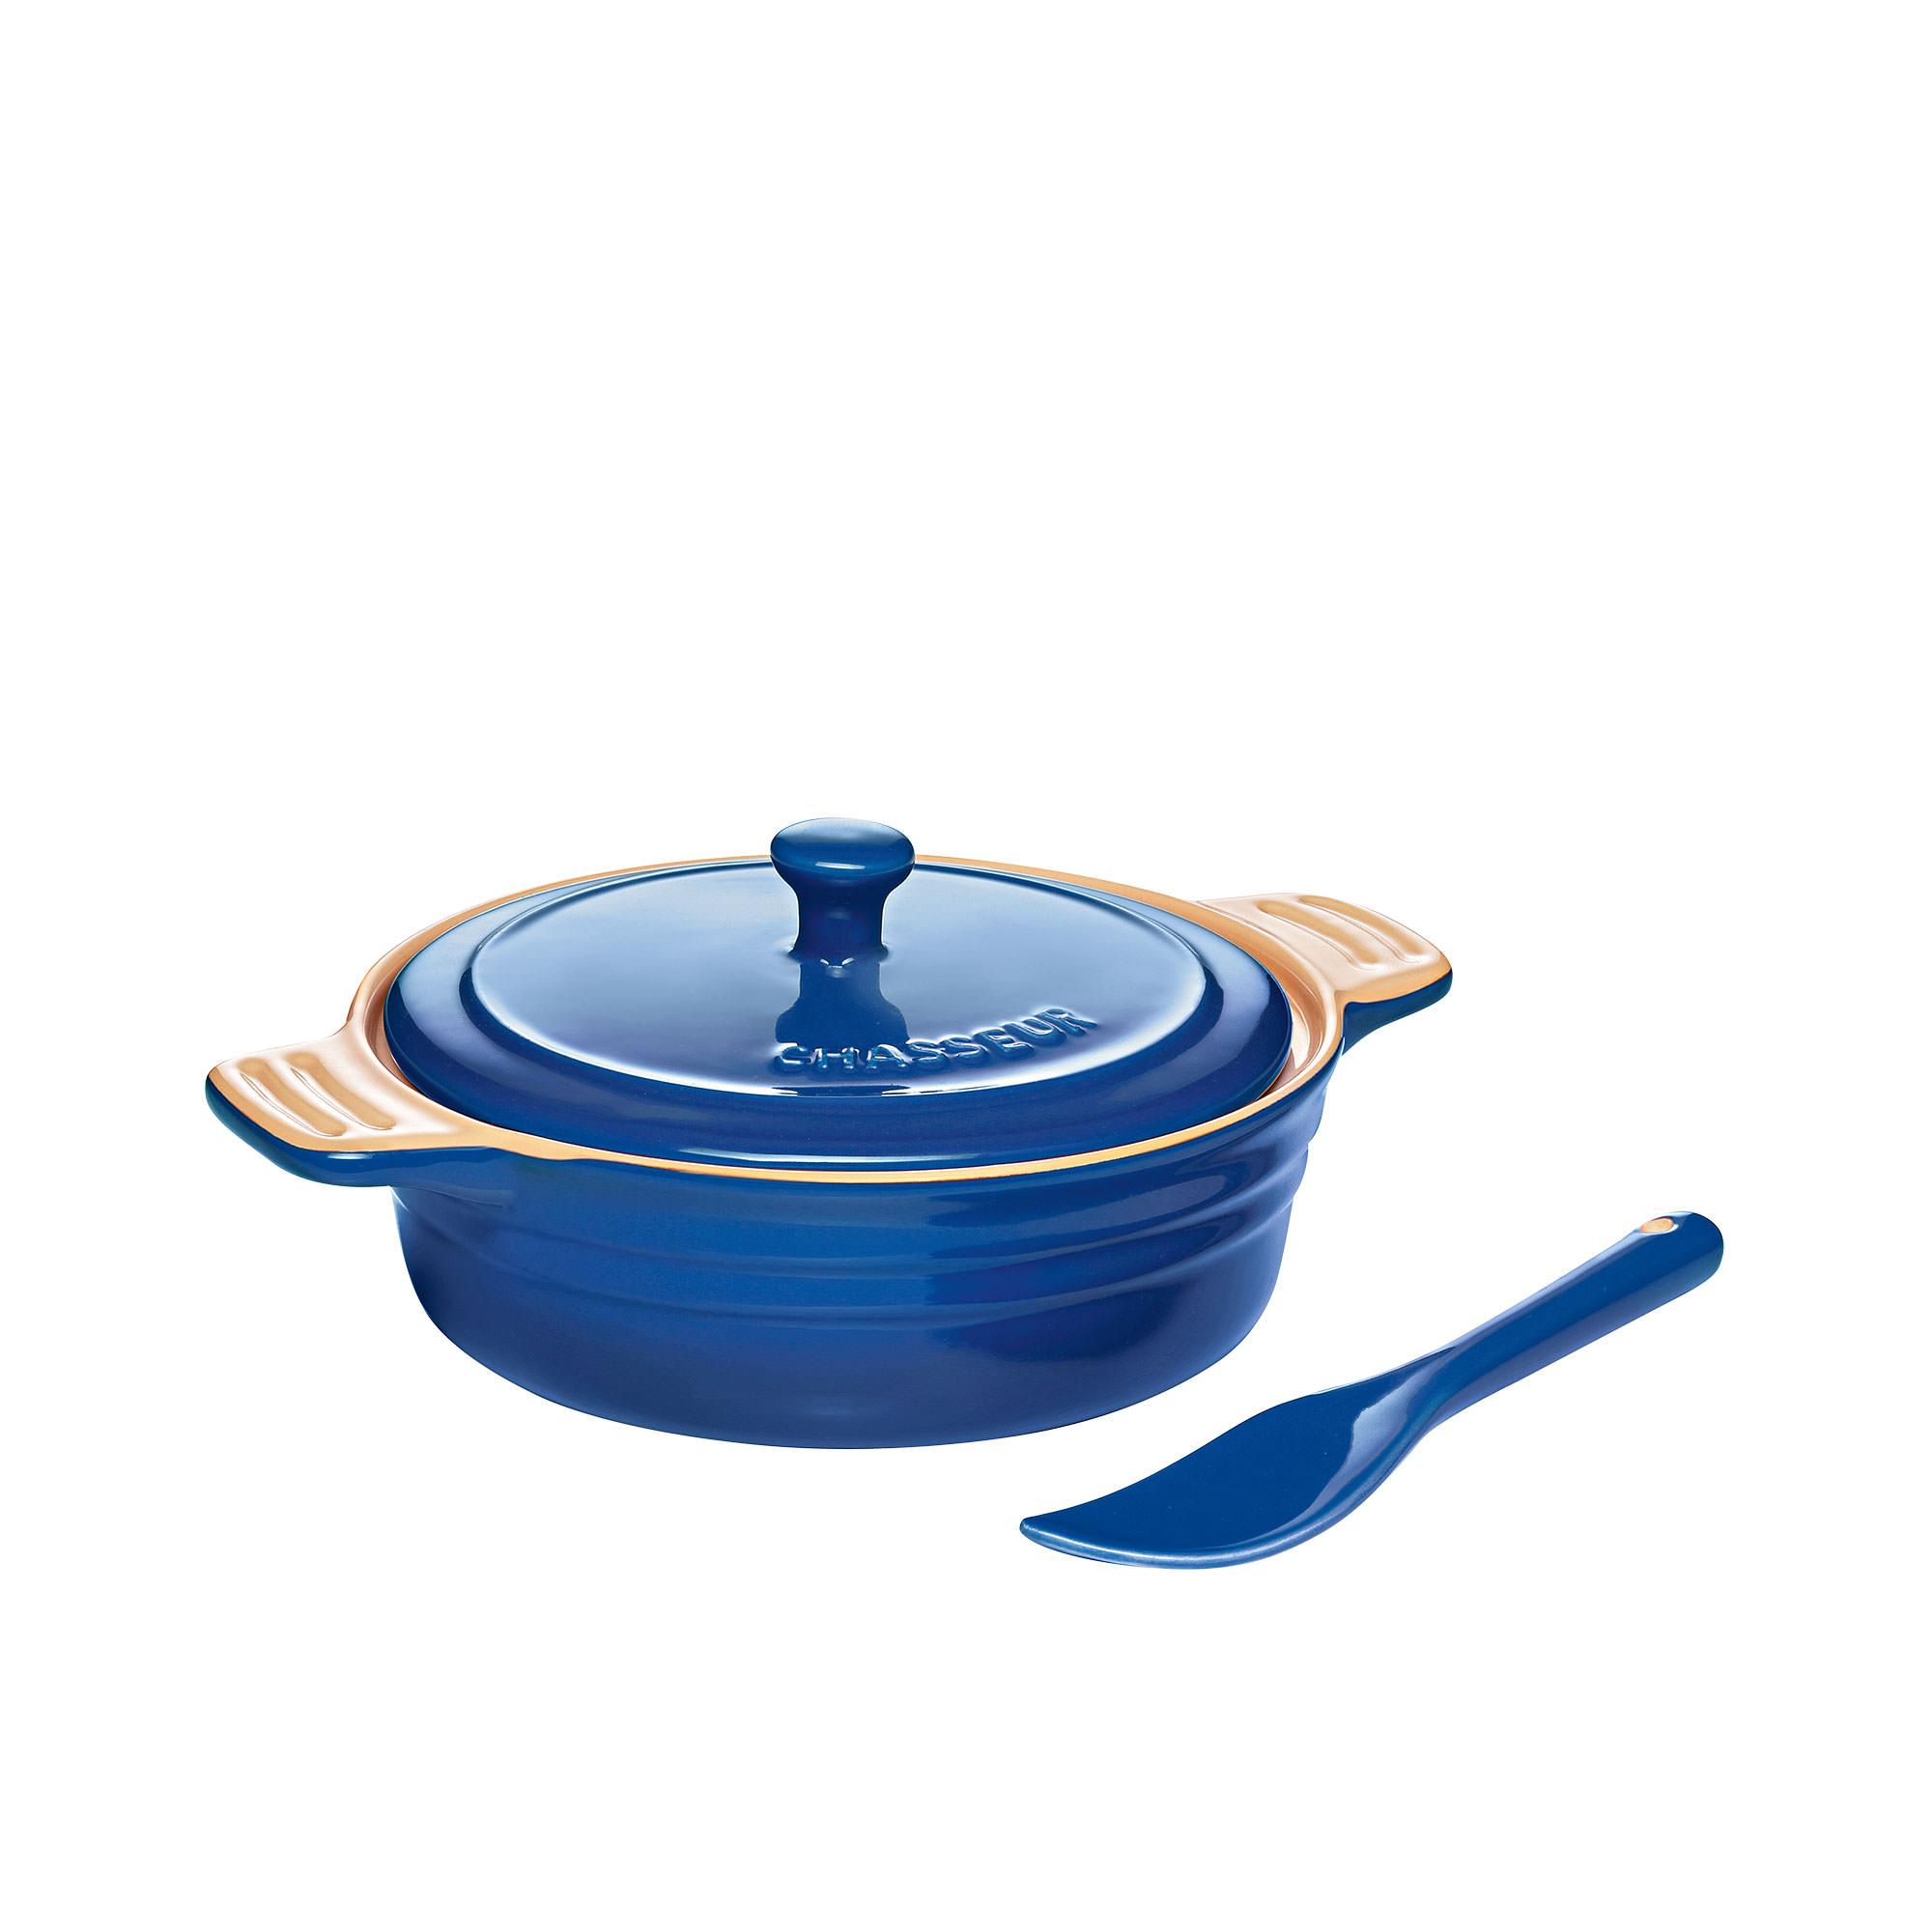 Chasseur La Cuisson Camembert Baker with Cheese Spreader Blue Image 1